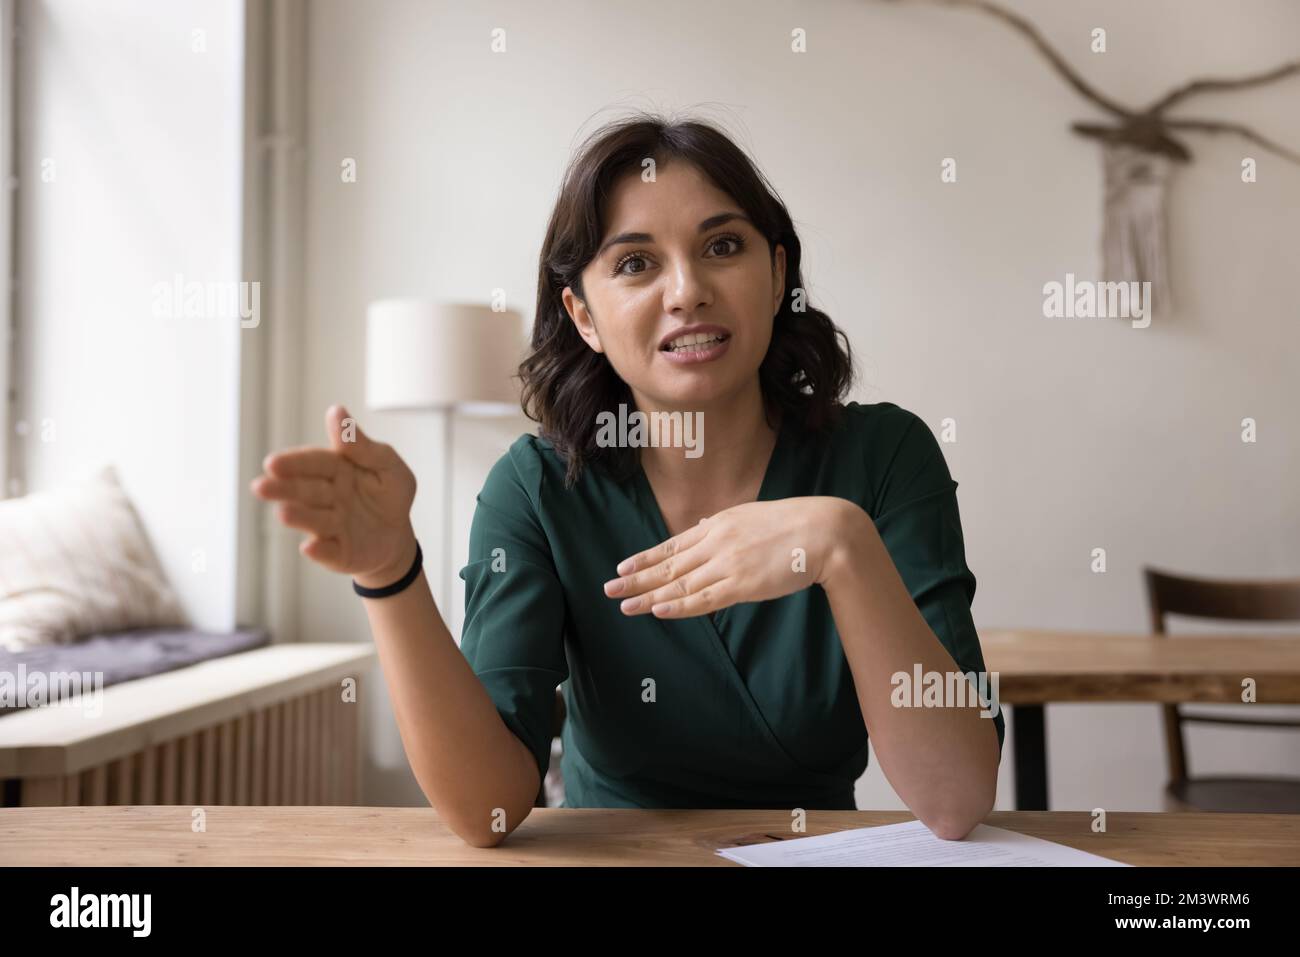 Positive engaged freelance professional woman speaking at camera Stock Photo